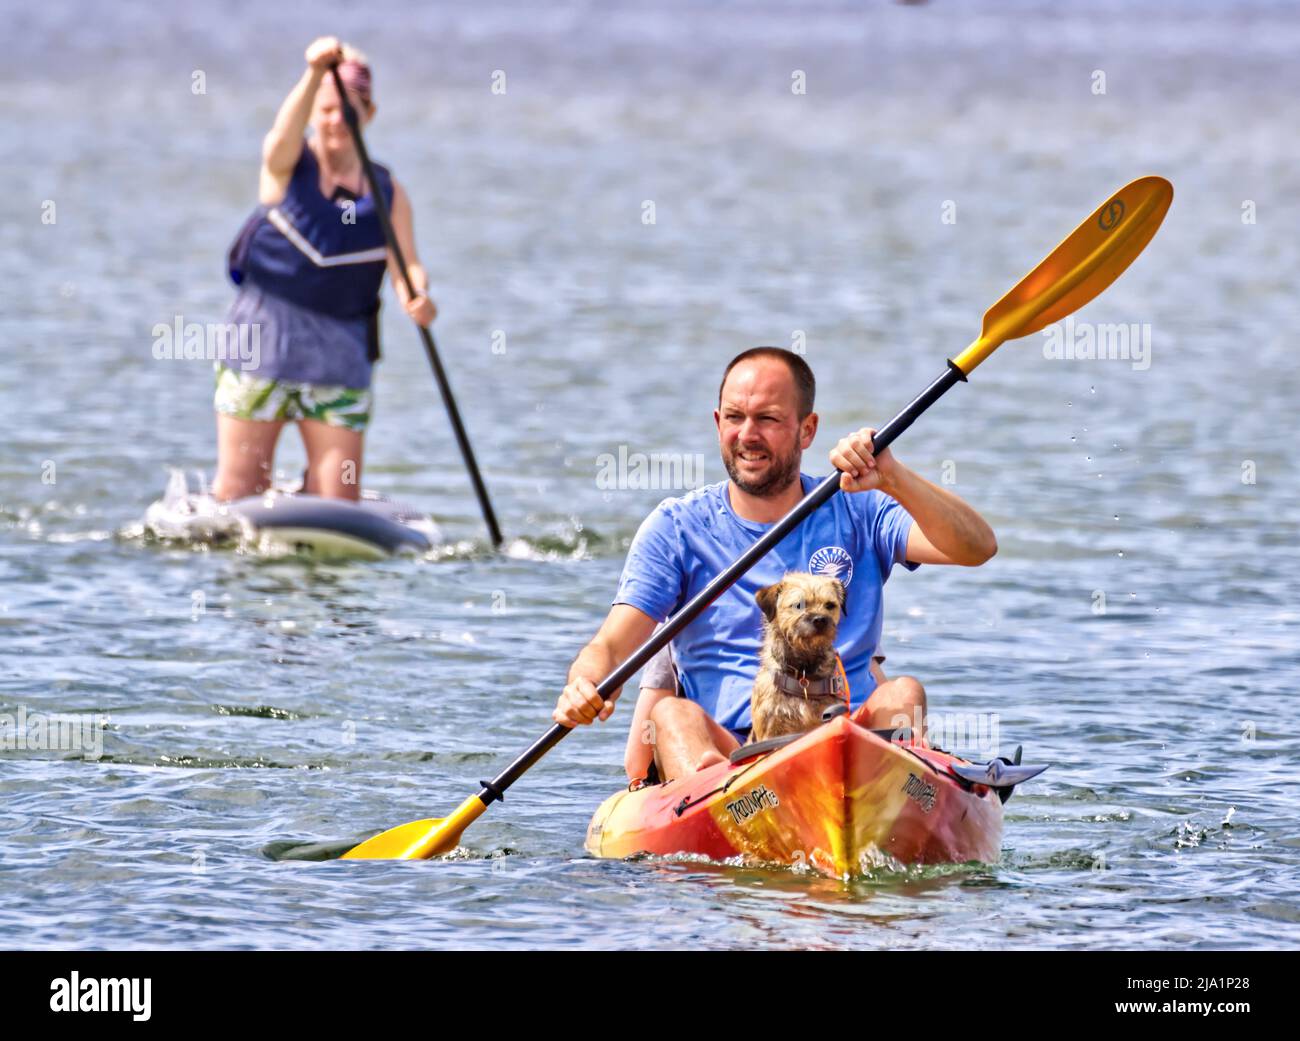 Paddle boarding with his best friend Stock Photo